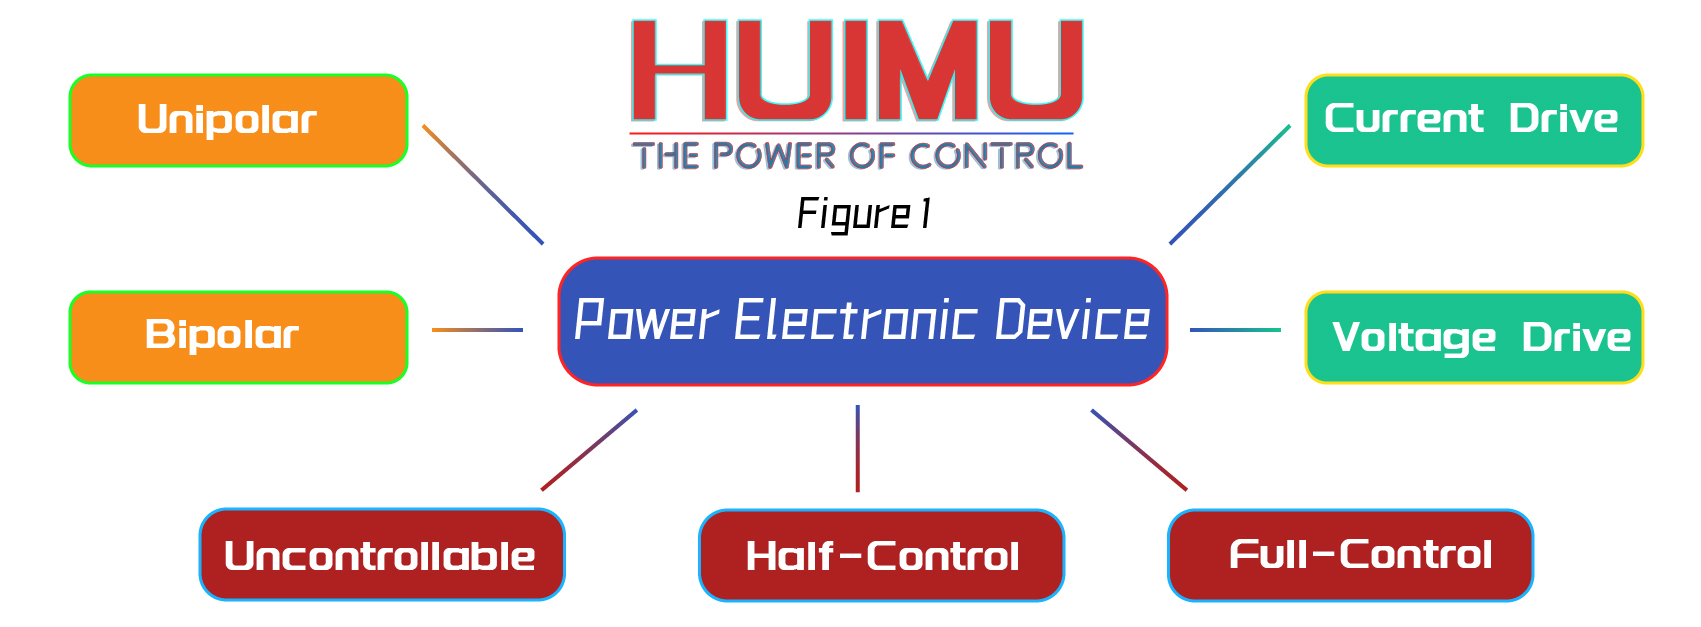 Power Electronic Device Features